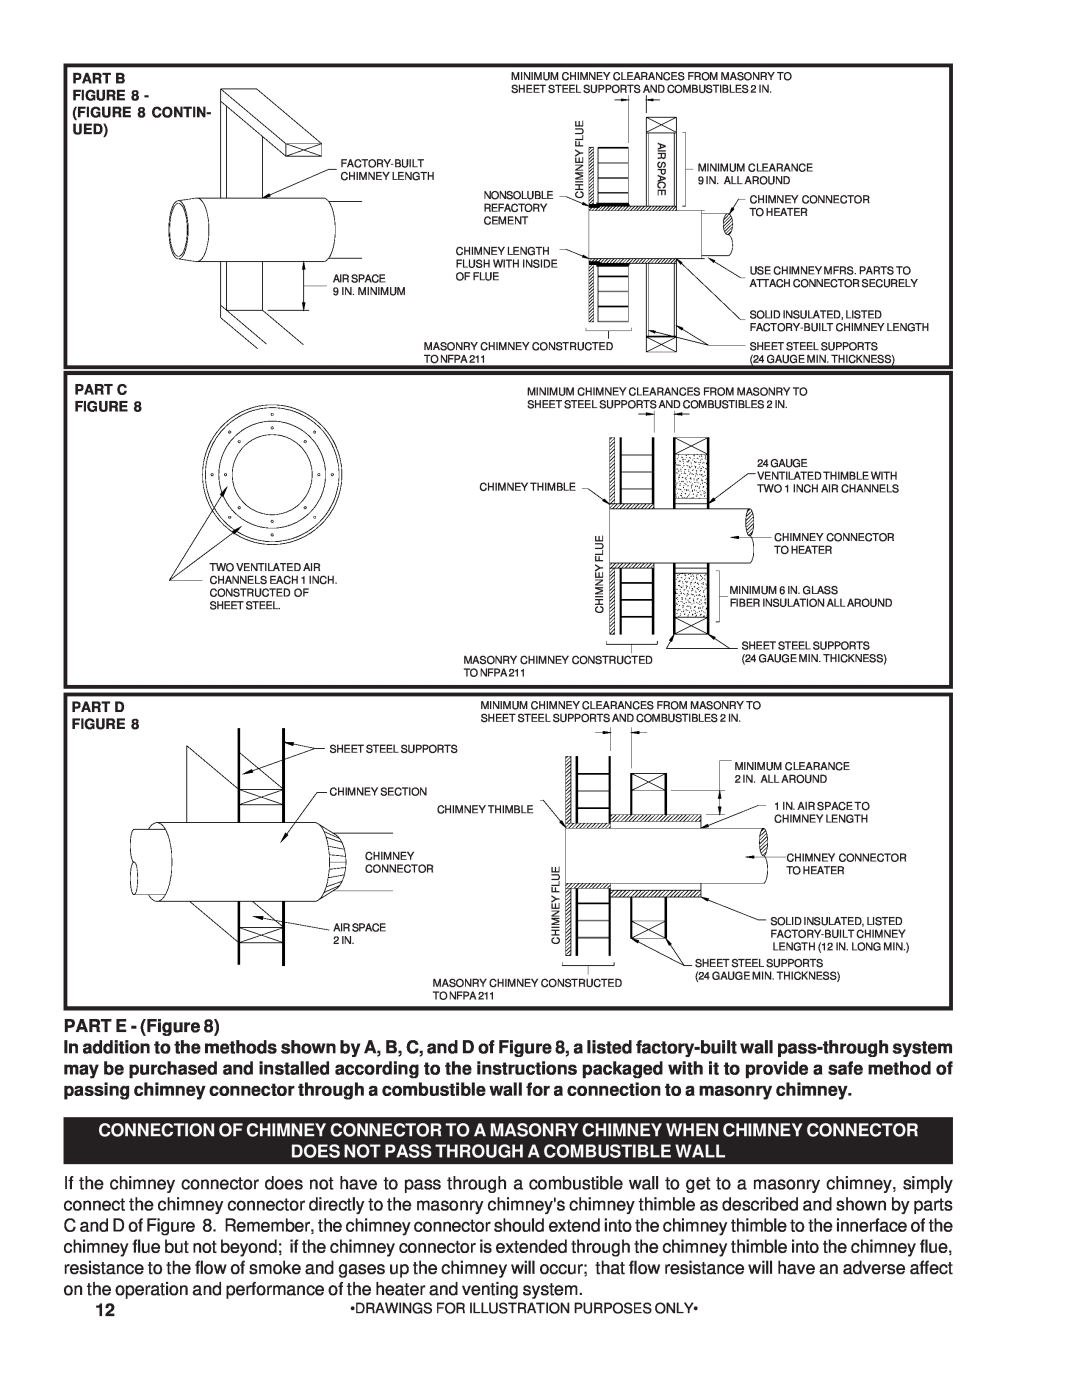 United States Stove 22AF PART E - Figure, Does Not Pass Through A Combustible Wall, Part B - Contin, Part C Figure 